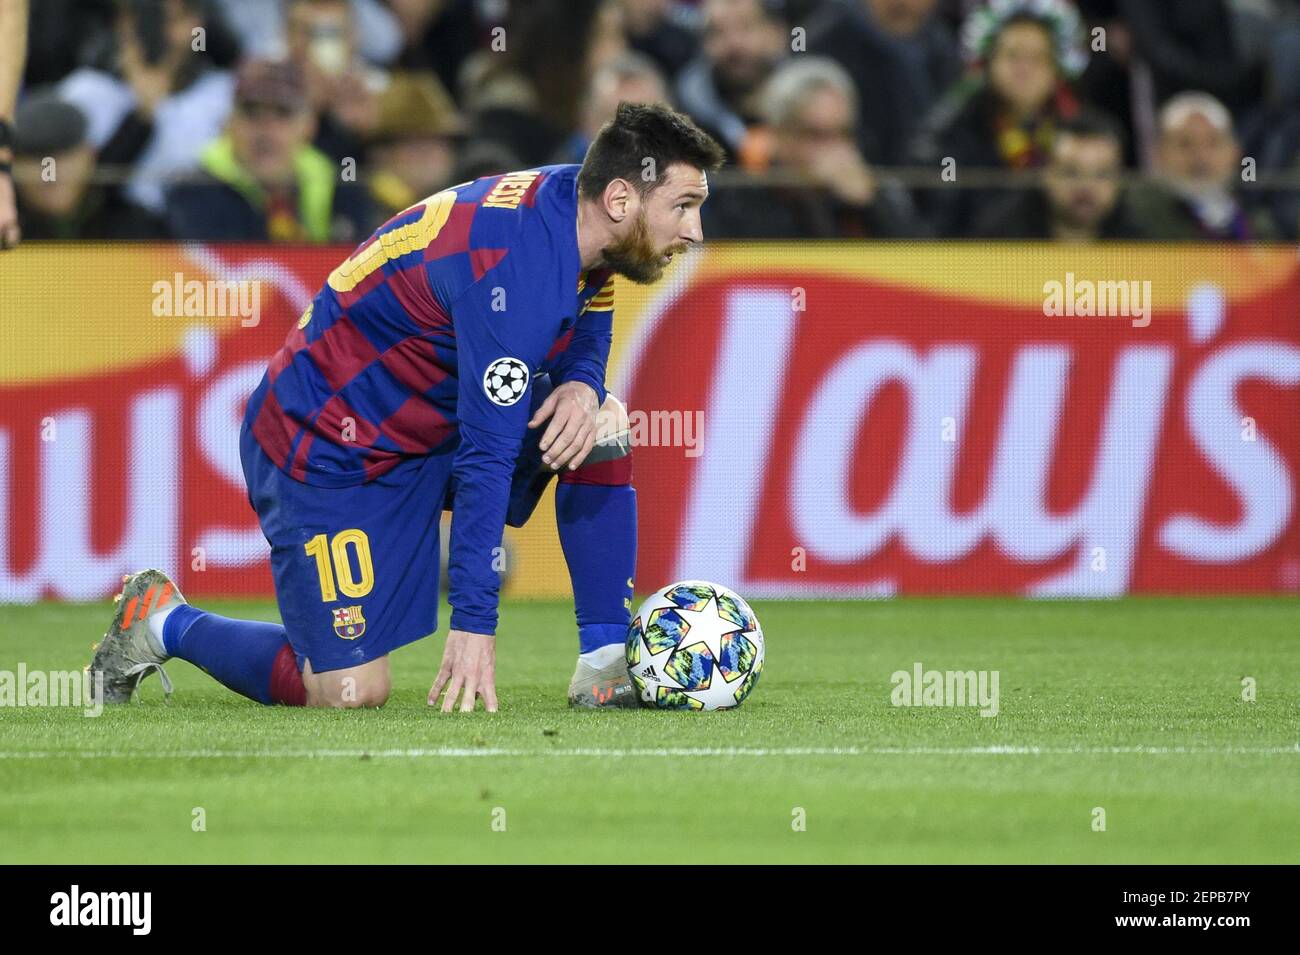 Lionel Messi of Barcelona prepares for a free kick during the UEFA Champions League Group F match between FC Barcelona and Borussia Dortmund at Camp Nou Stadium in Barcelona, Spain on November 27, 2019 (Photo by Andrew Surma / SIPA USA) Stock Photo